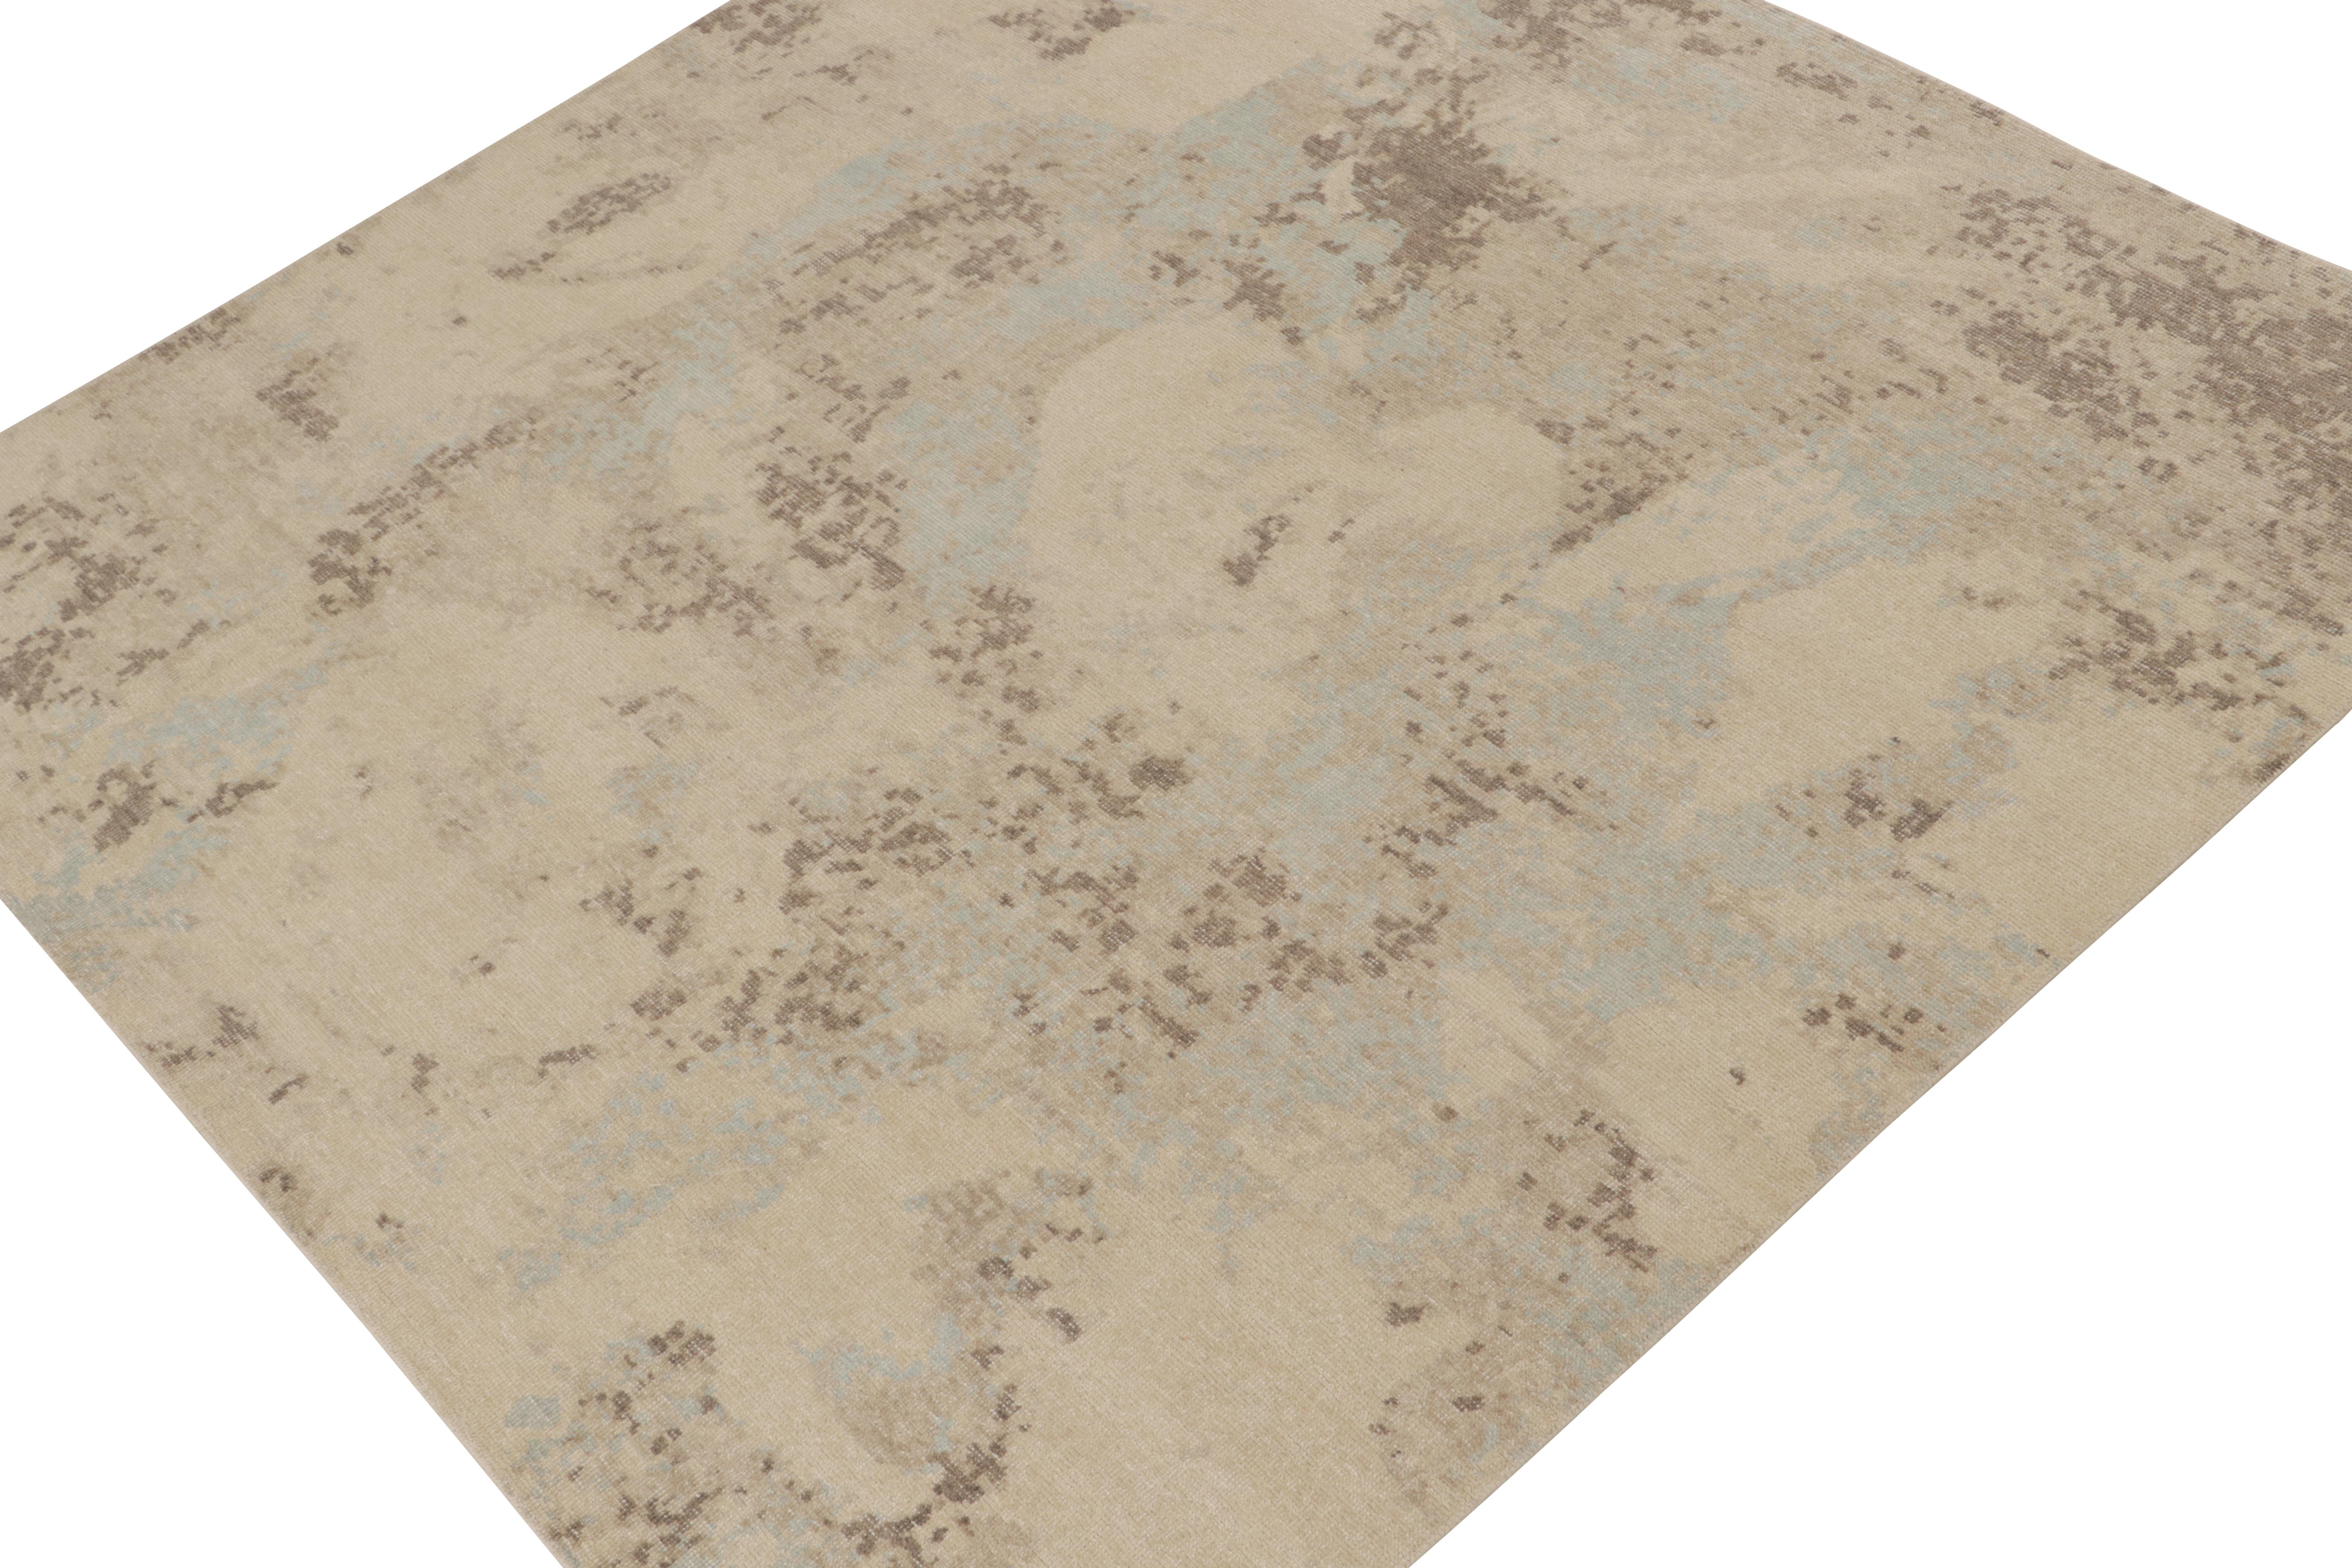 This square 8x8 abstract rug is a new addition to the Homage Collection by Rug & Kilim.

Further On the Design:

Hand knotted in wool and cotton, this modern rug enjoys neutral colors with beige, brown, and blue painterly patterns. Our texture